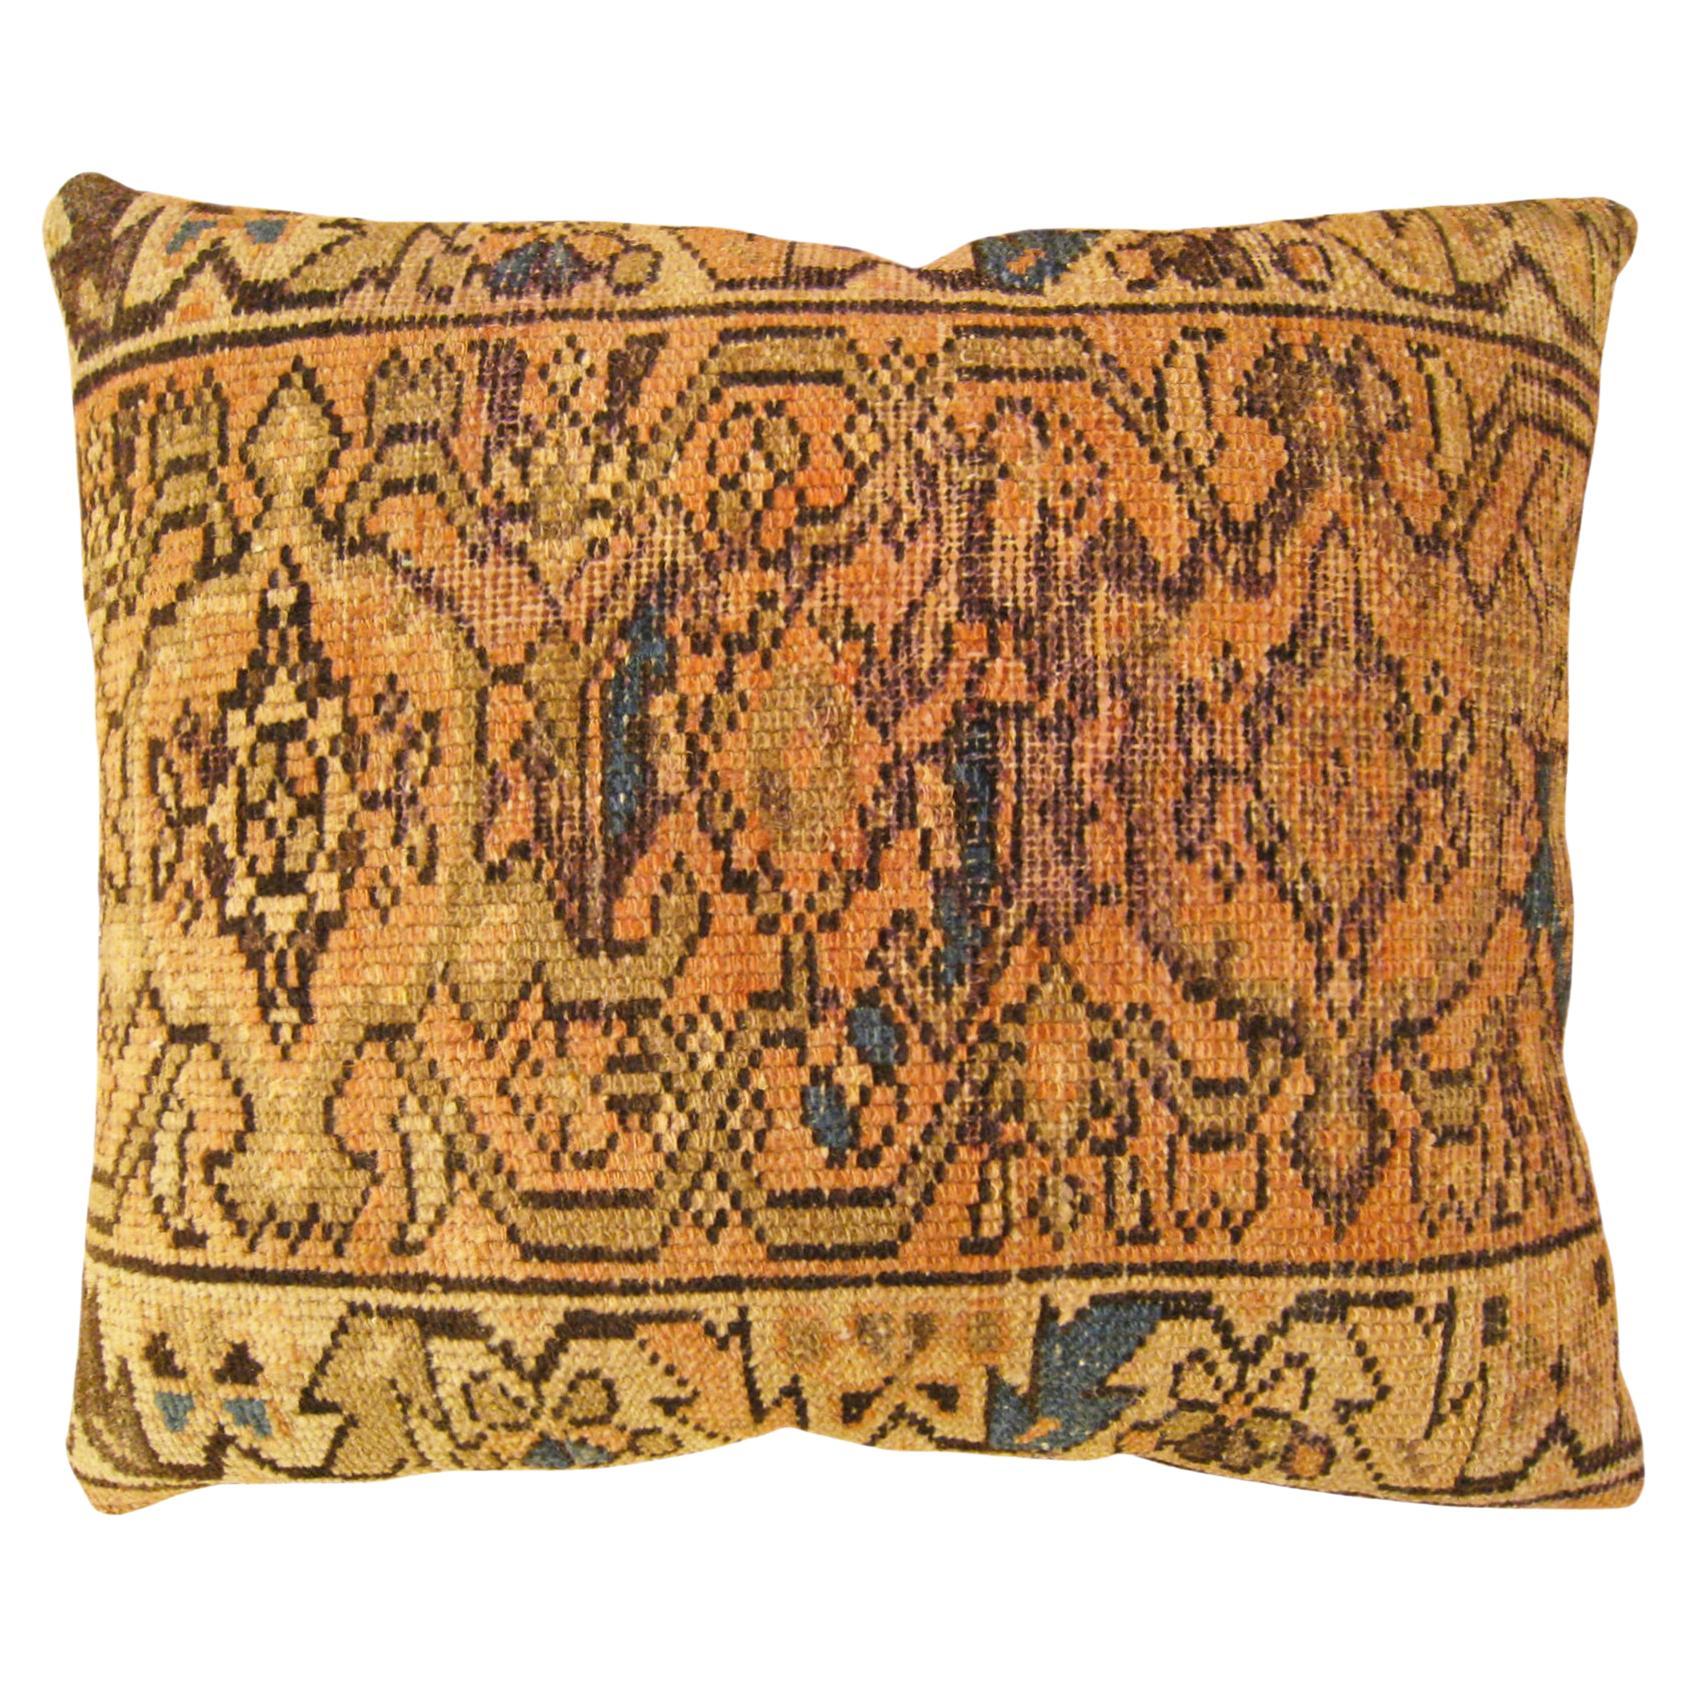  Decorative Antique Persian Hamadan Rug Pillow with Geometric Abstracts Allover For Sale